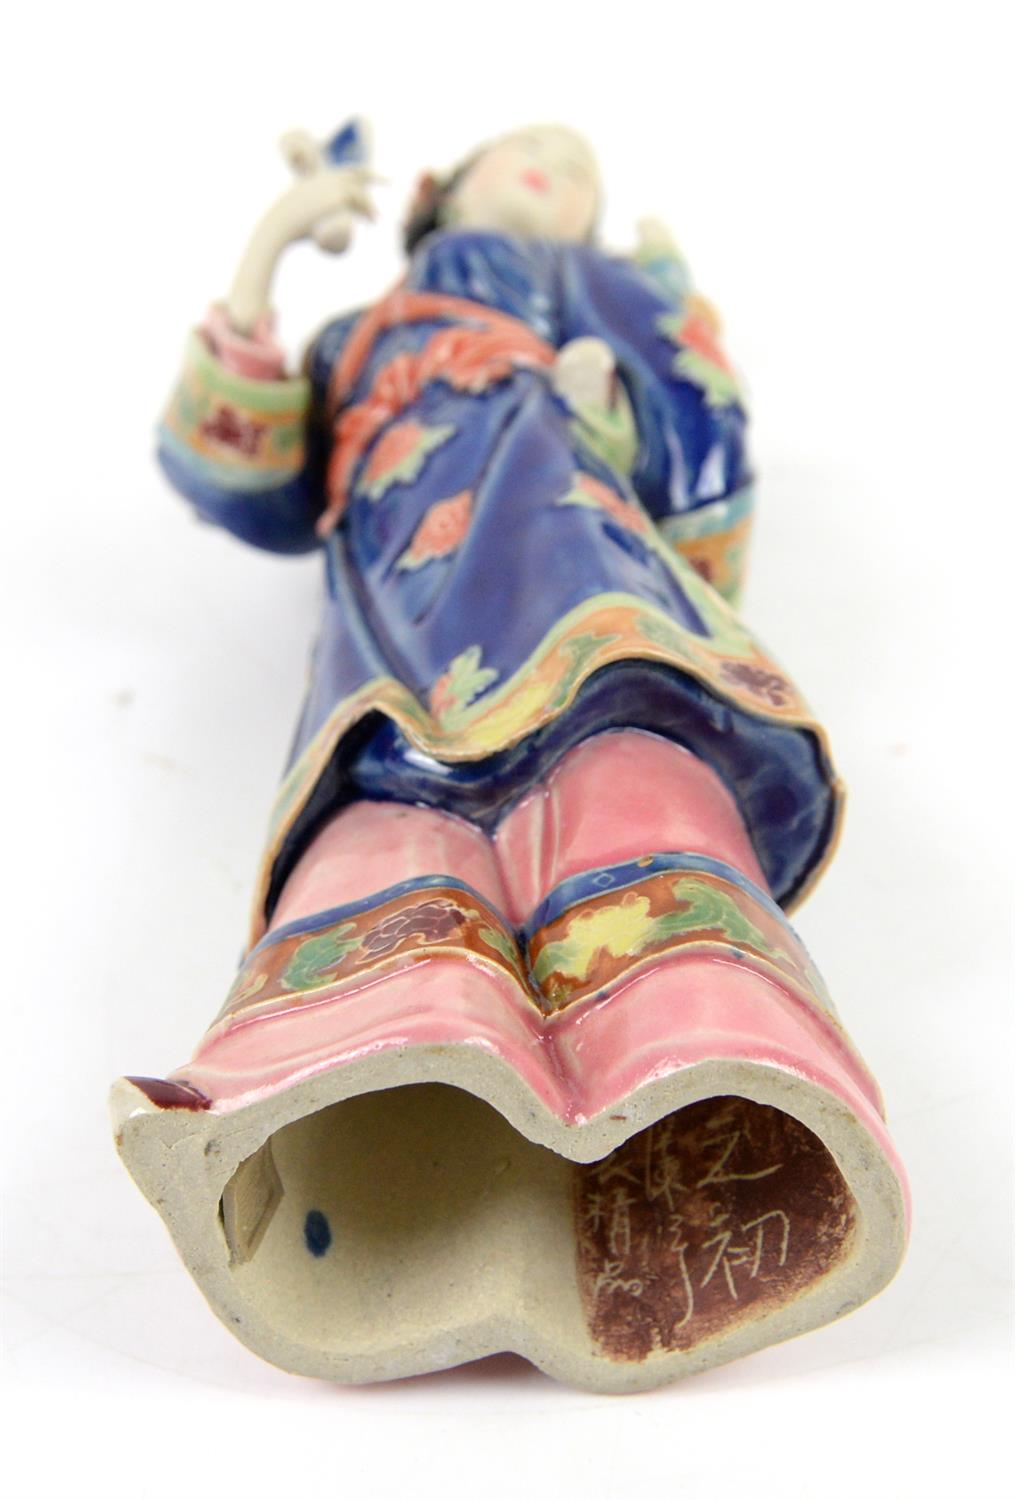 Polychrome ceramic Manchu/Chinese girl and child, signed to interior - Image 12 of 14